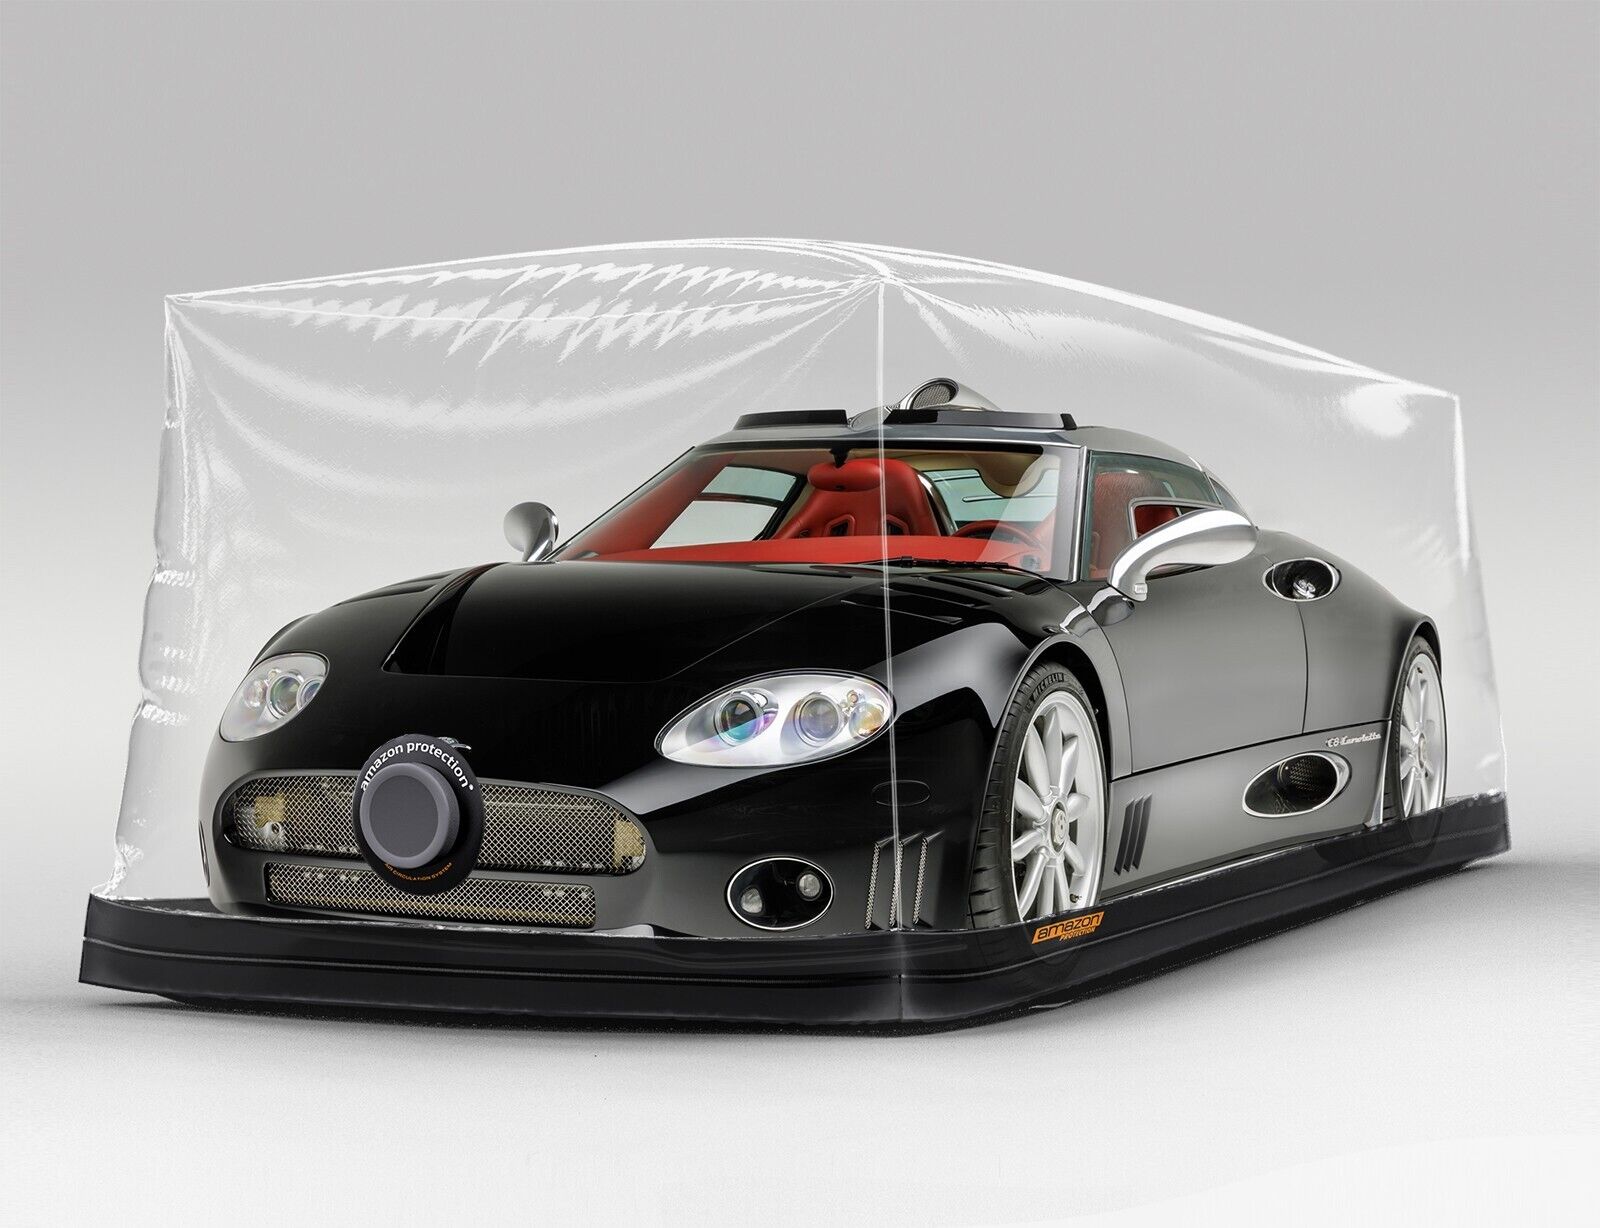 Amazon Protection Car Cover Spyker C8 Inflatable Capsule Car Bubble Cover